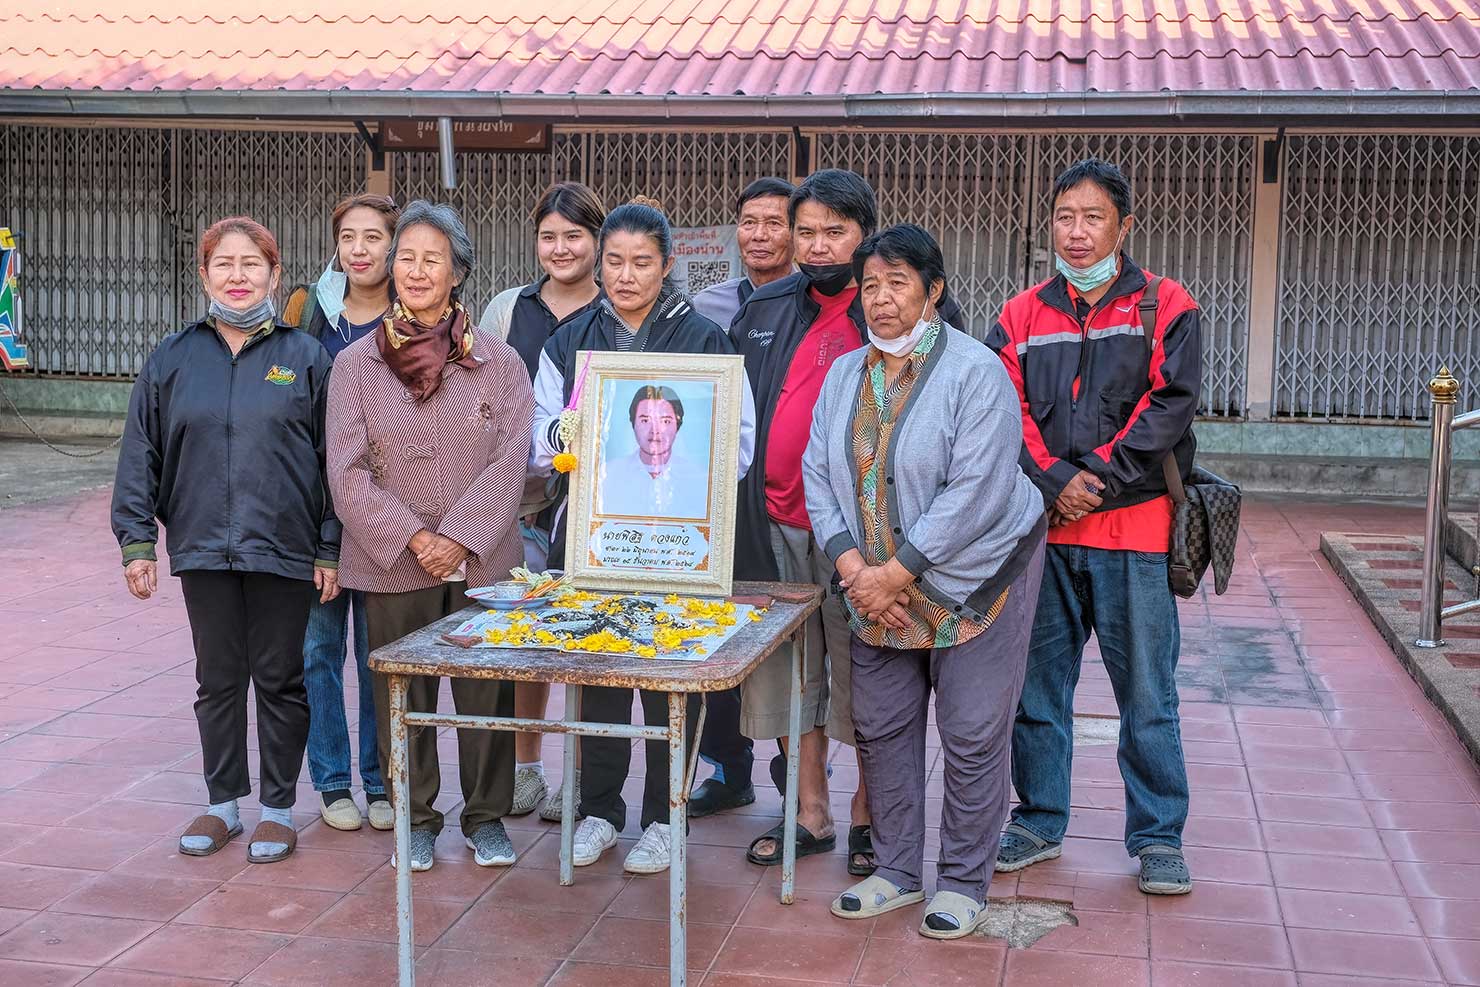 March (center front, holding photo) and her family gather around a photo of her deceased brother, Phisit Duangkaew during his Buddhist funeral